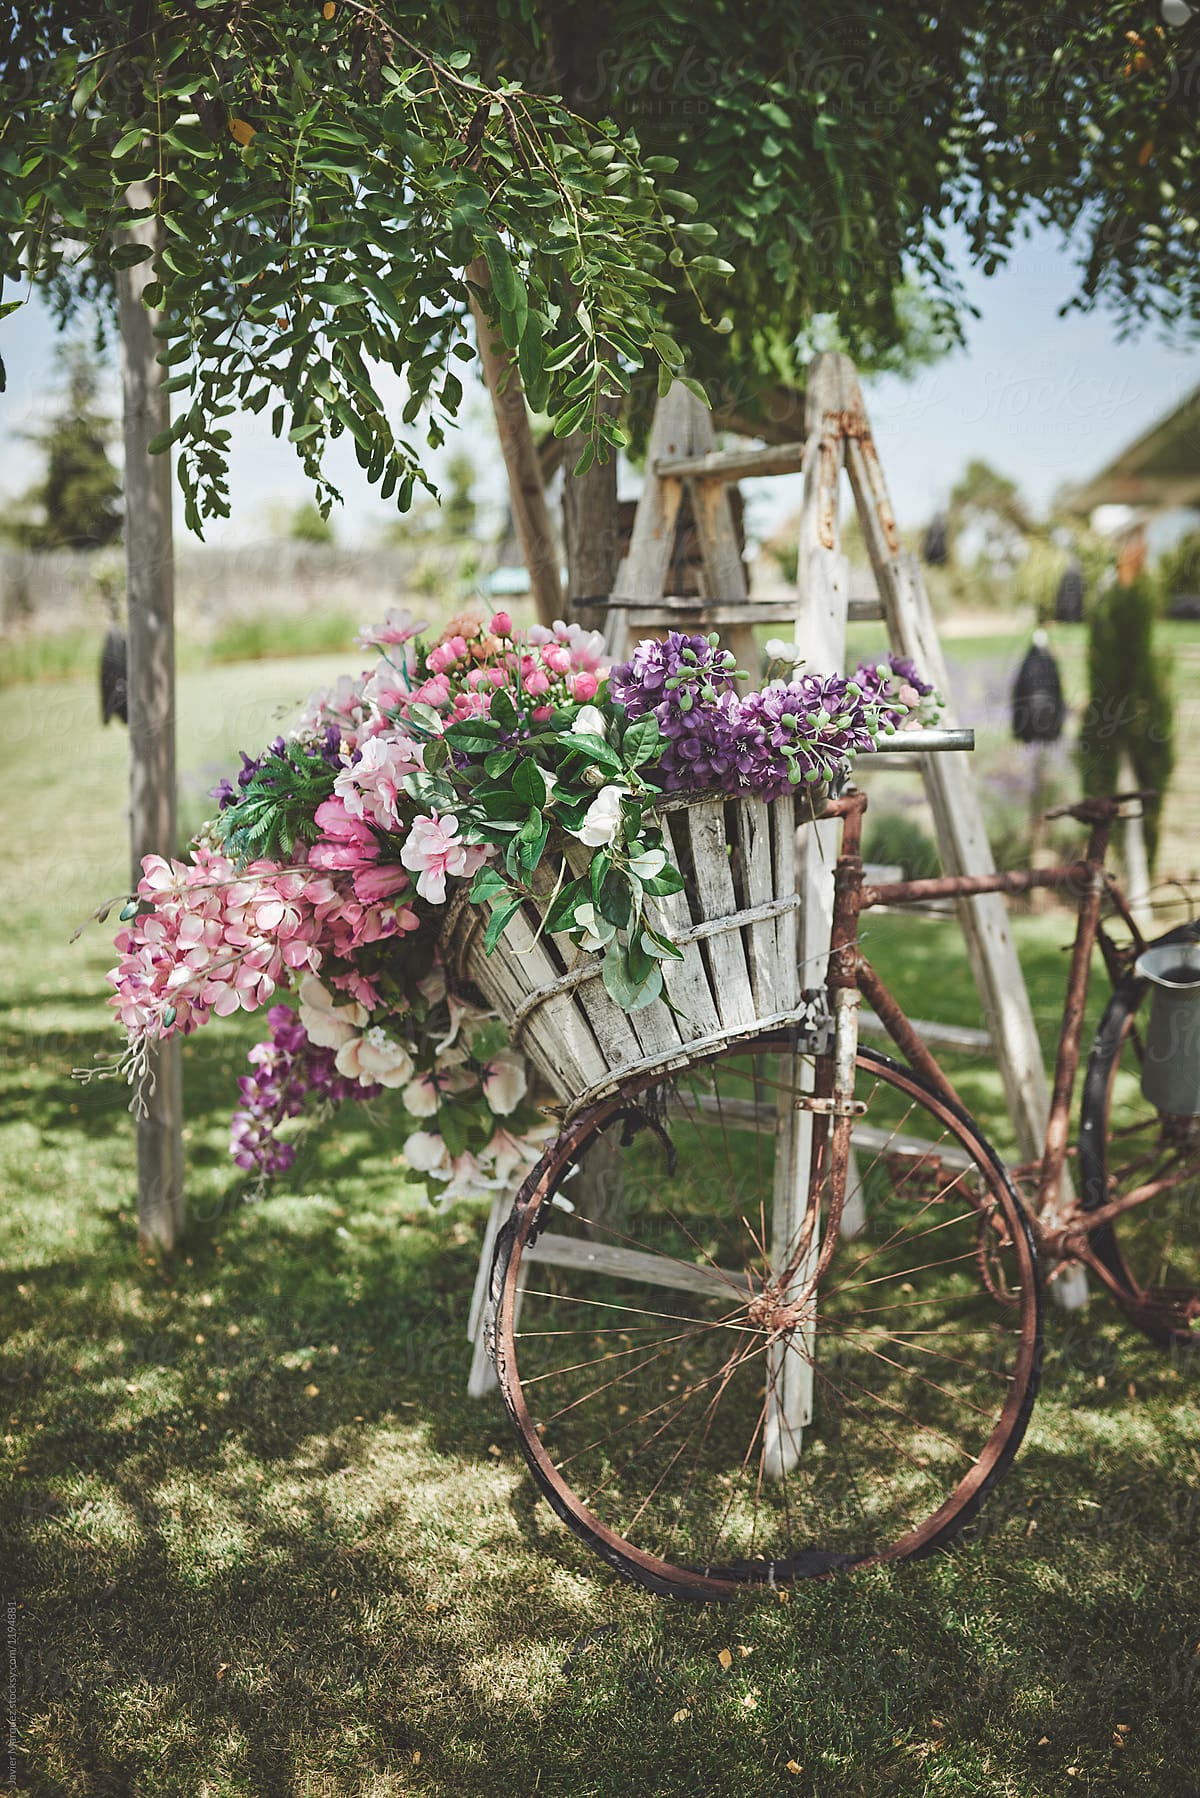 Bycicle  decorated with flowers